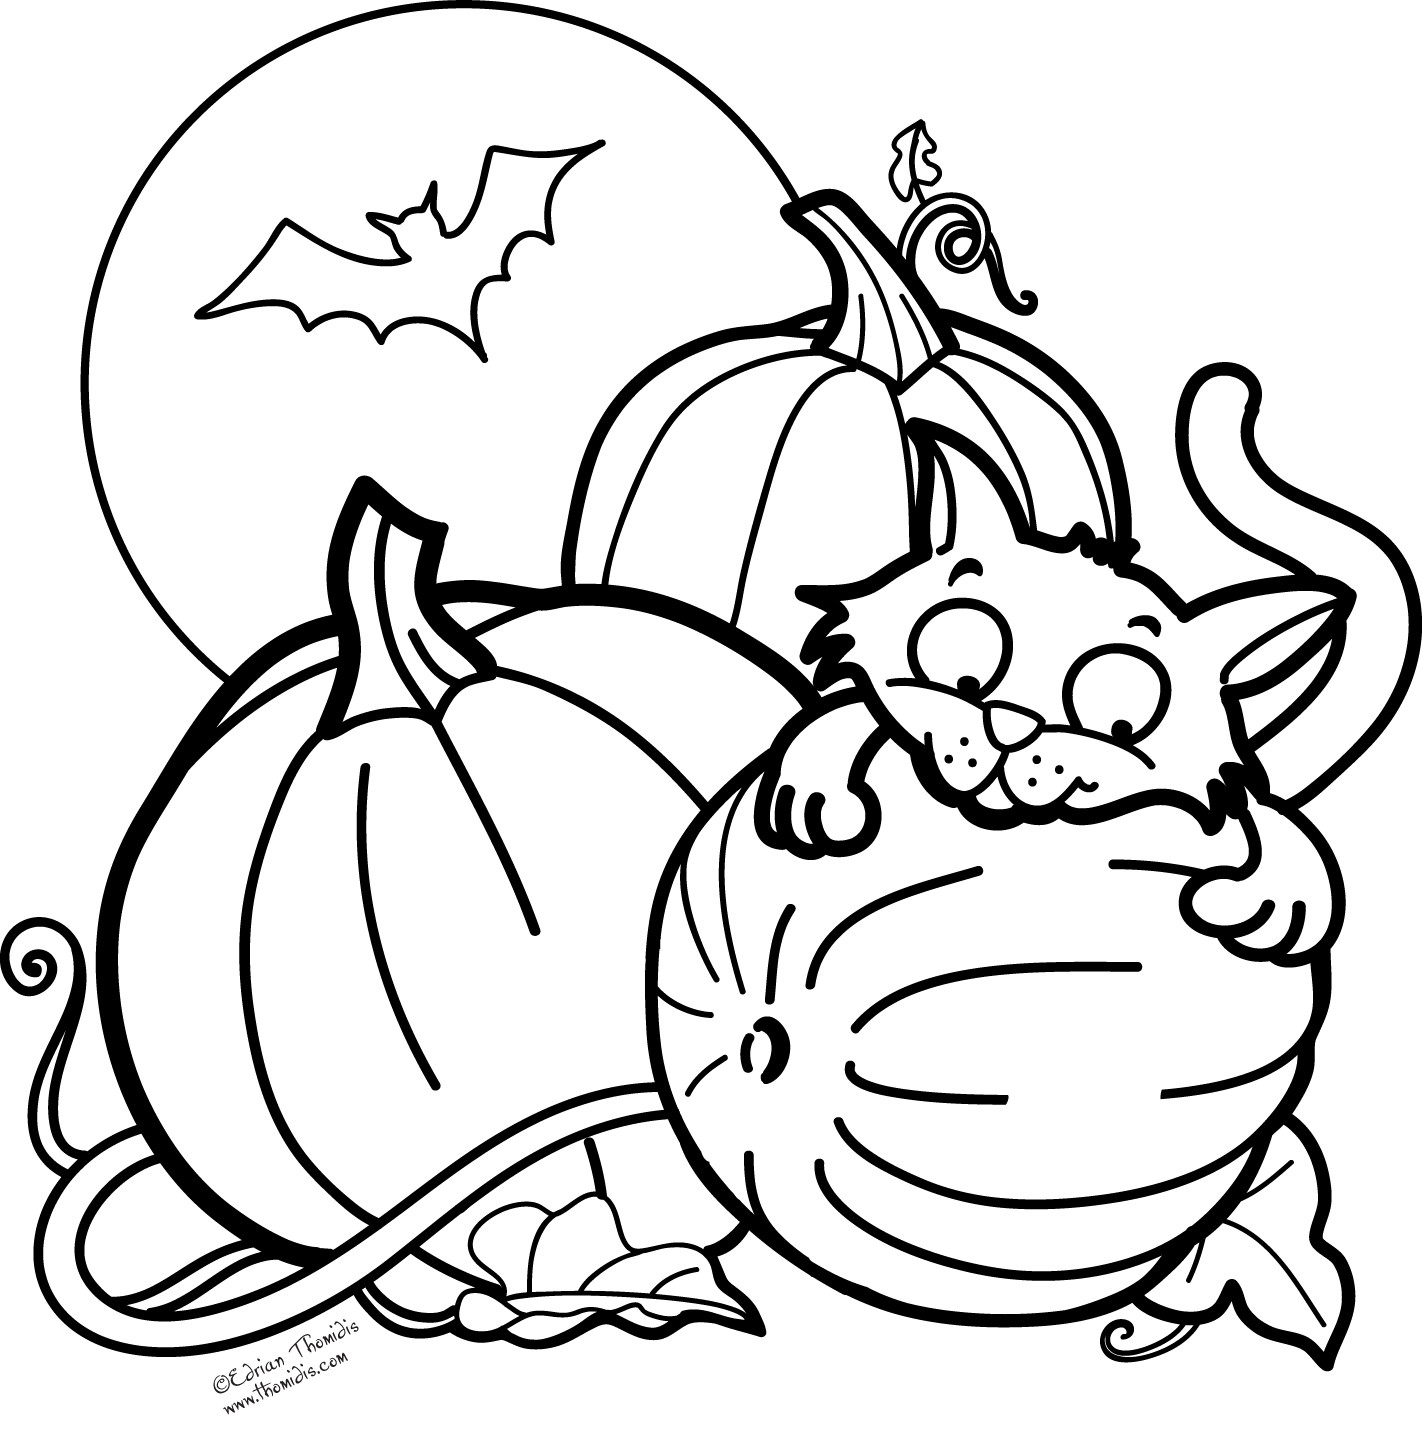 Halloween Coloring Pages Free Printable
 A picture paints a thousand words